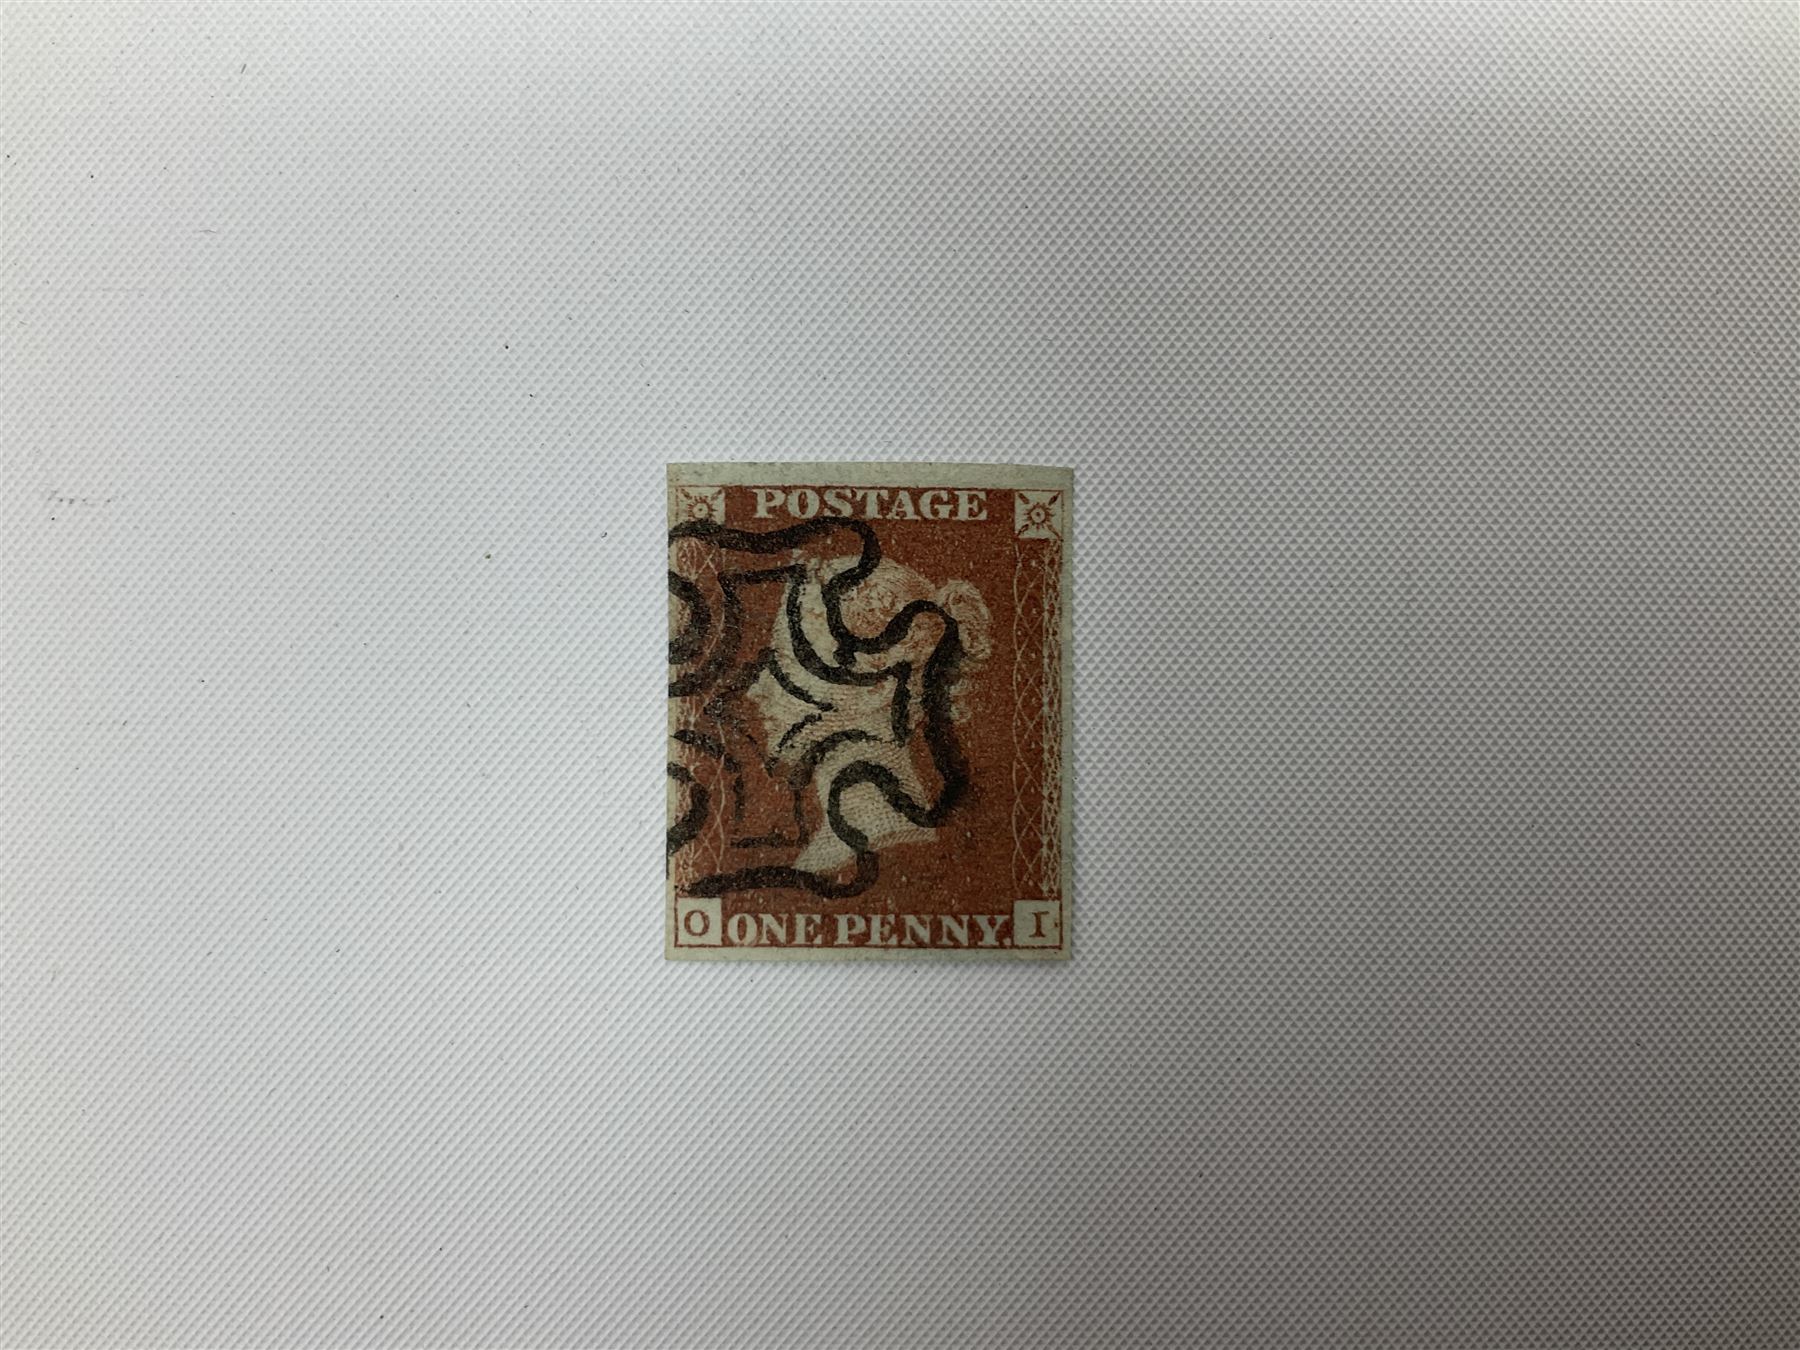 Great Britain Queen Victoria penny black stamp - Image 4 of 9